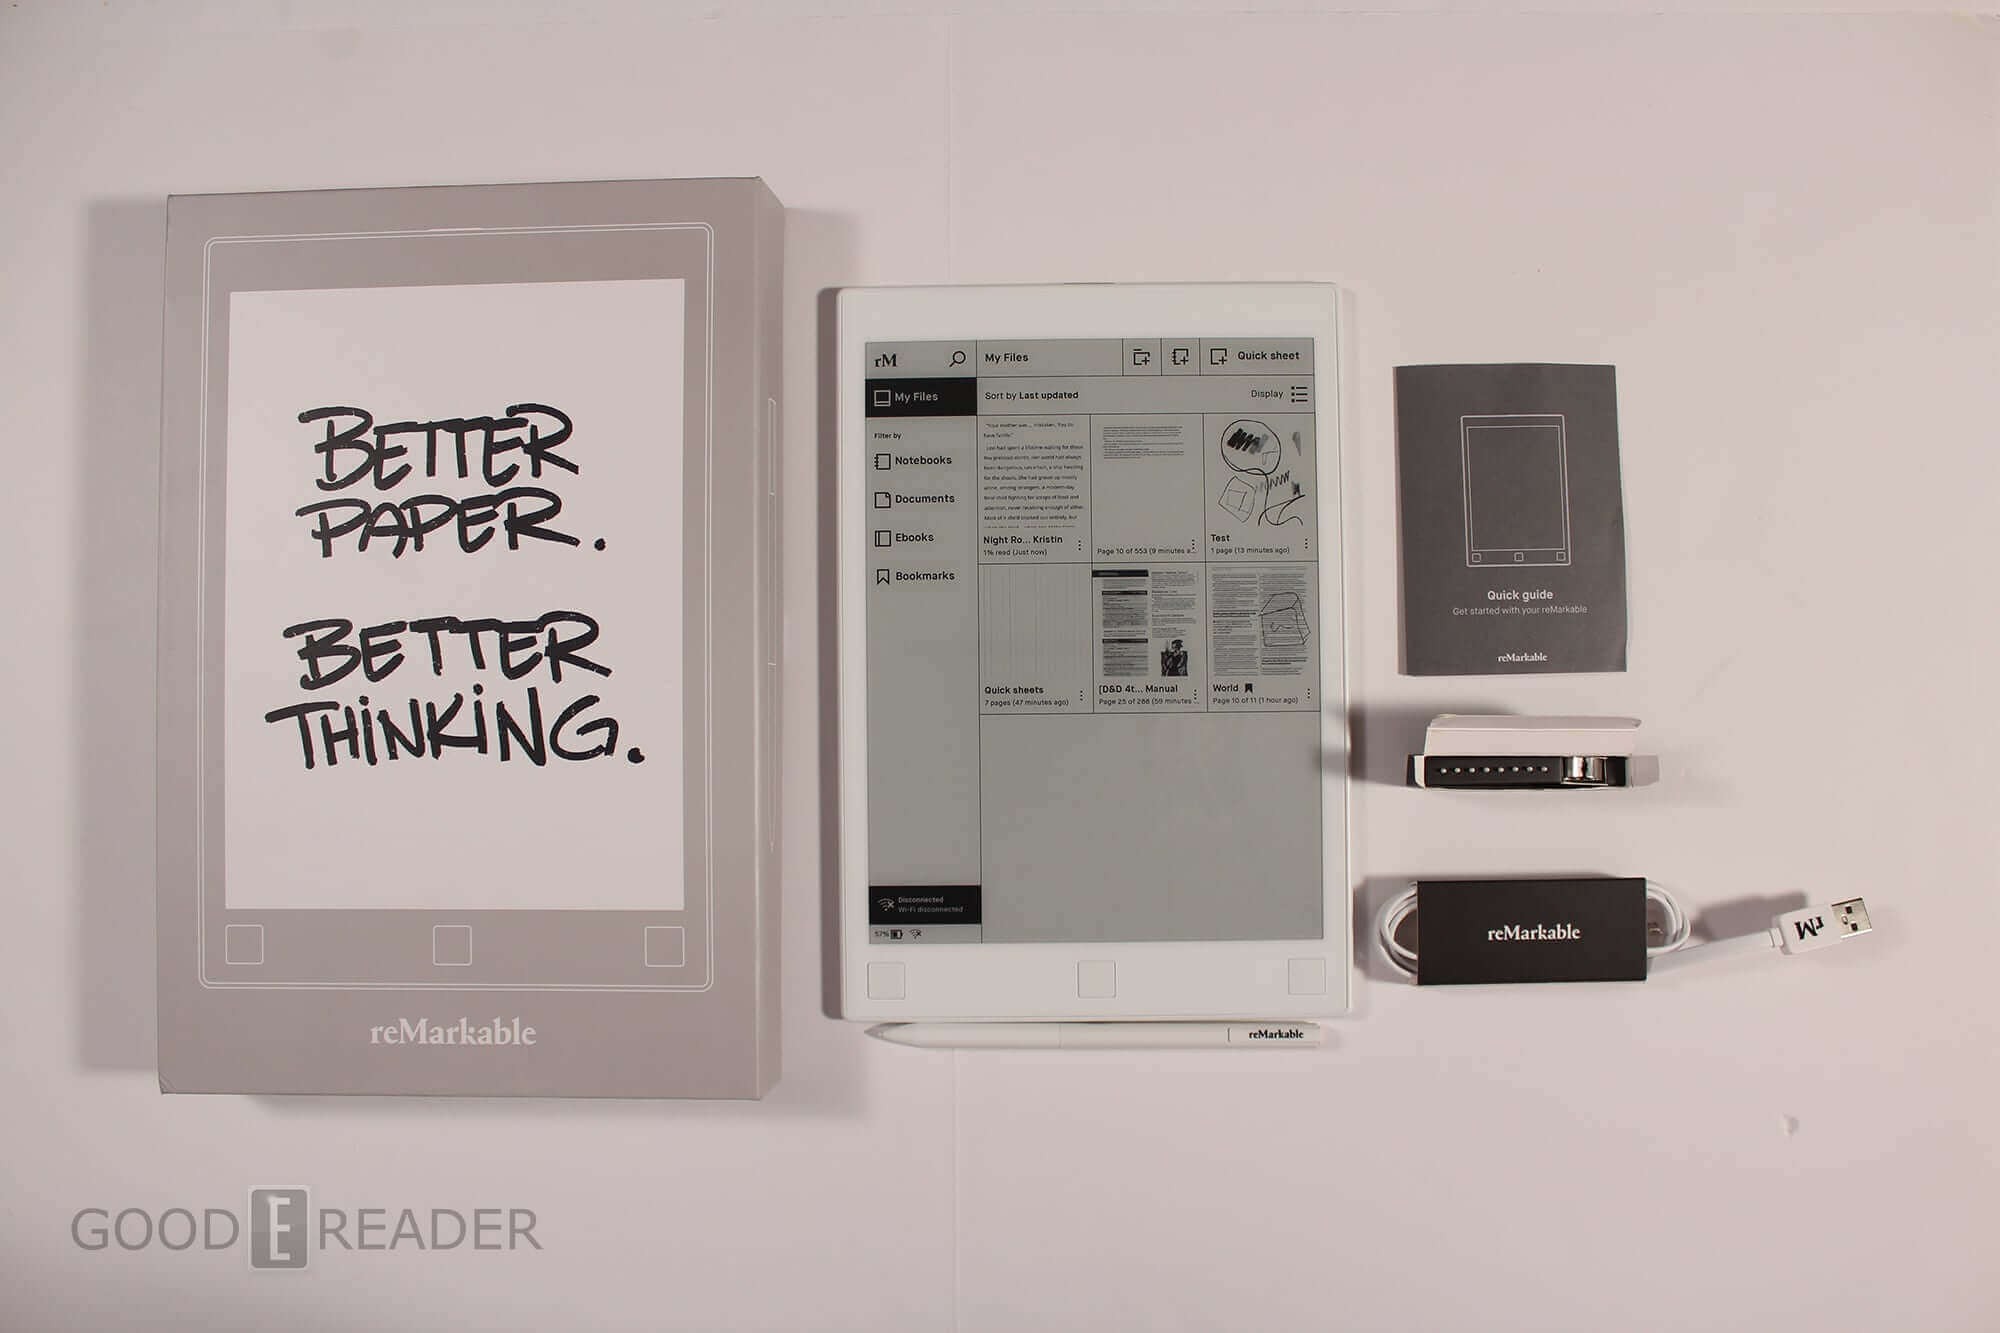 reMarkable paper tablet has sketches, notes and documents in its